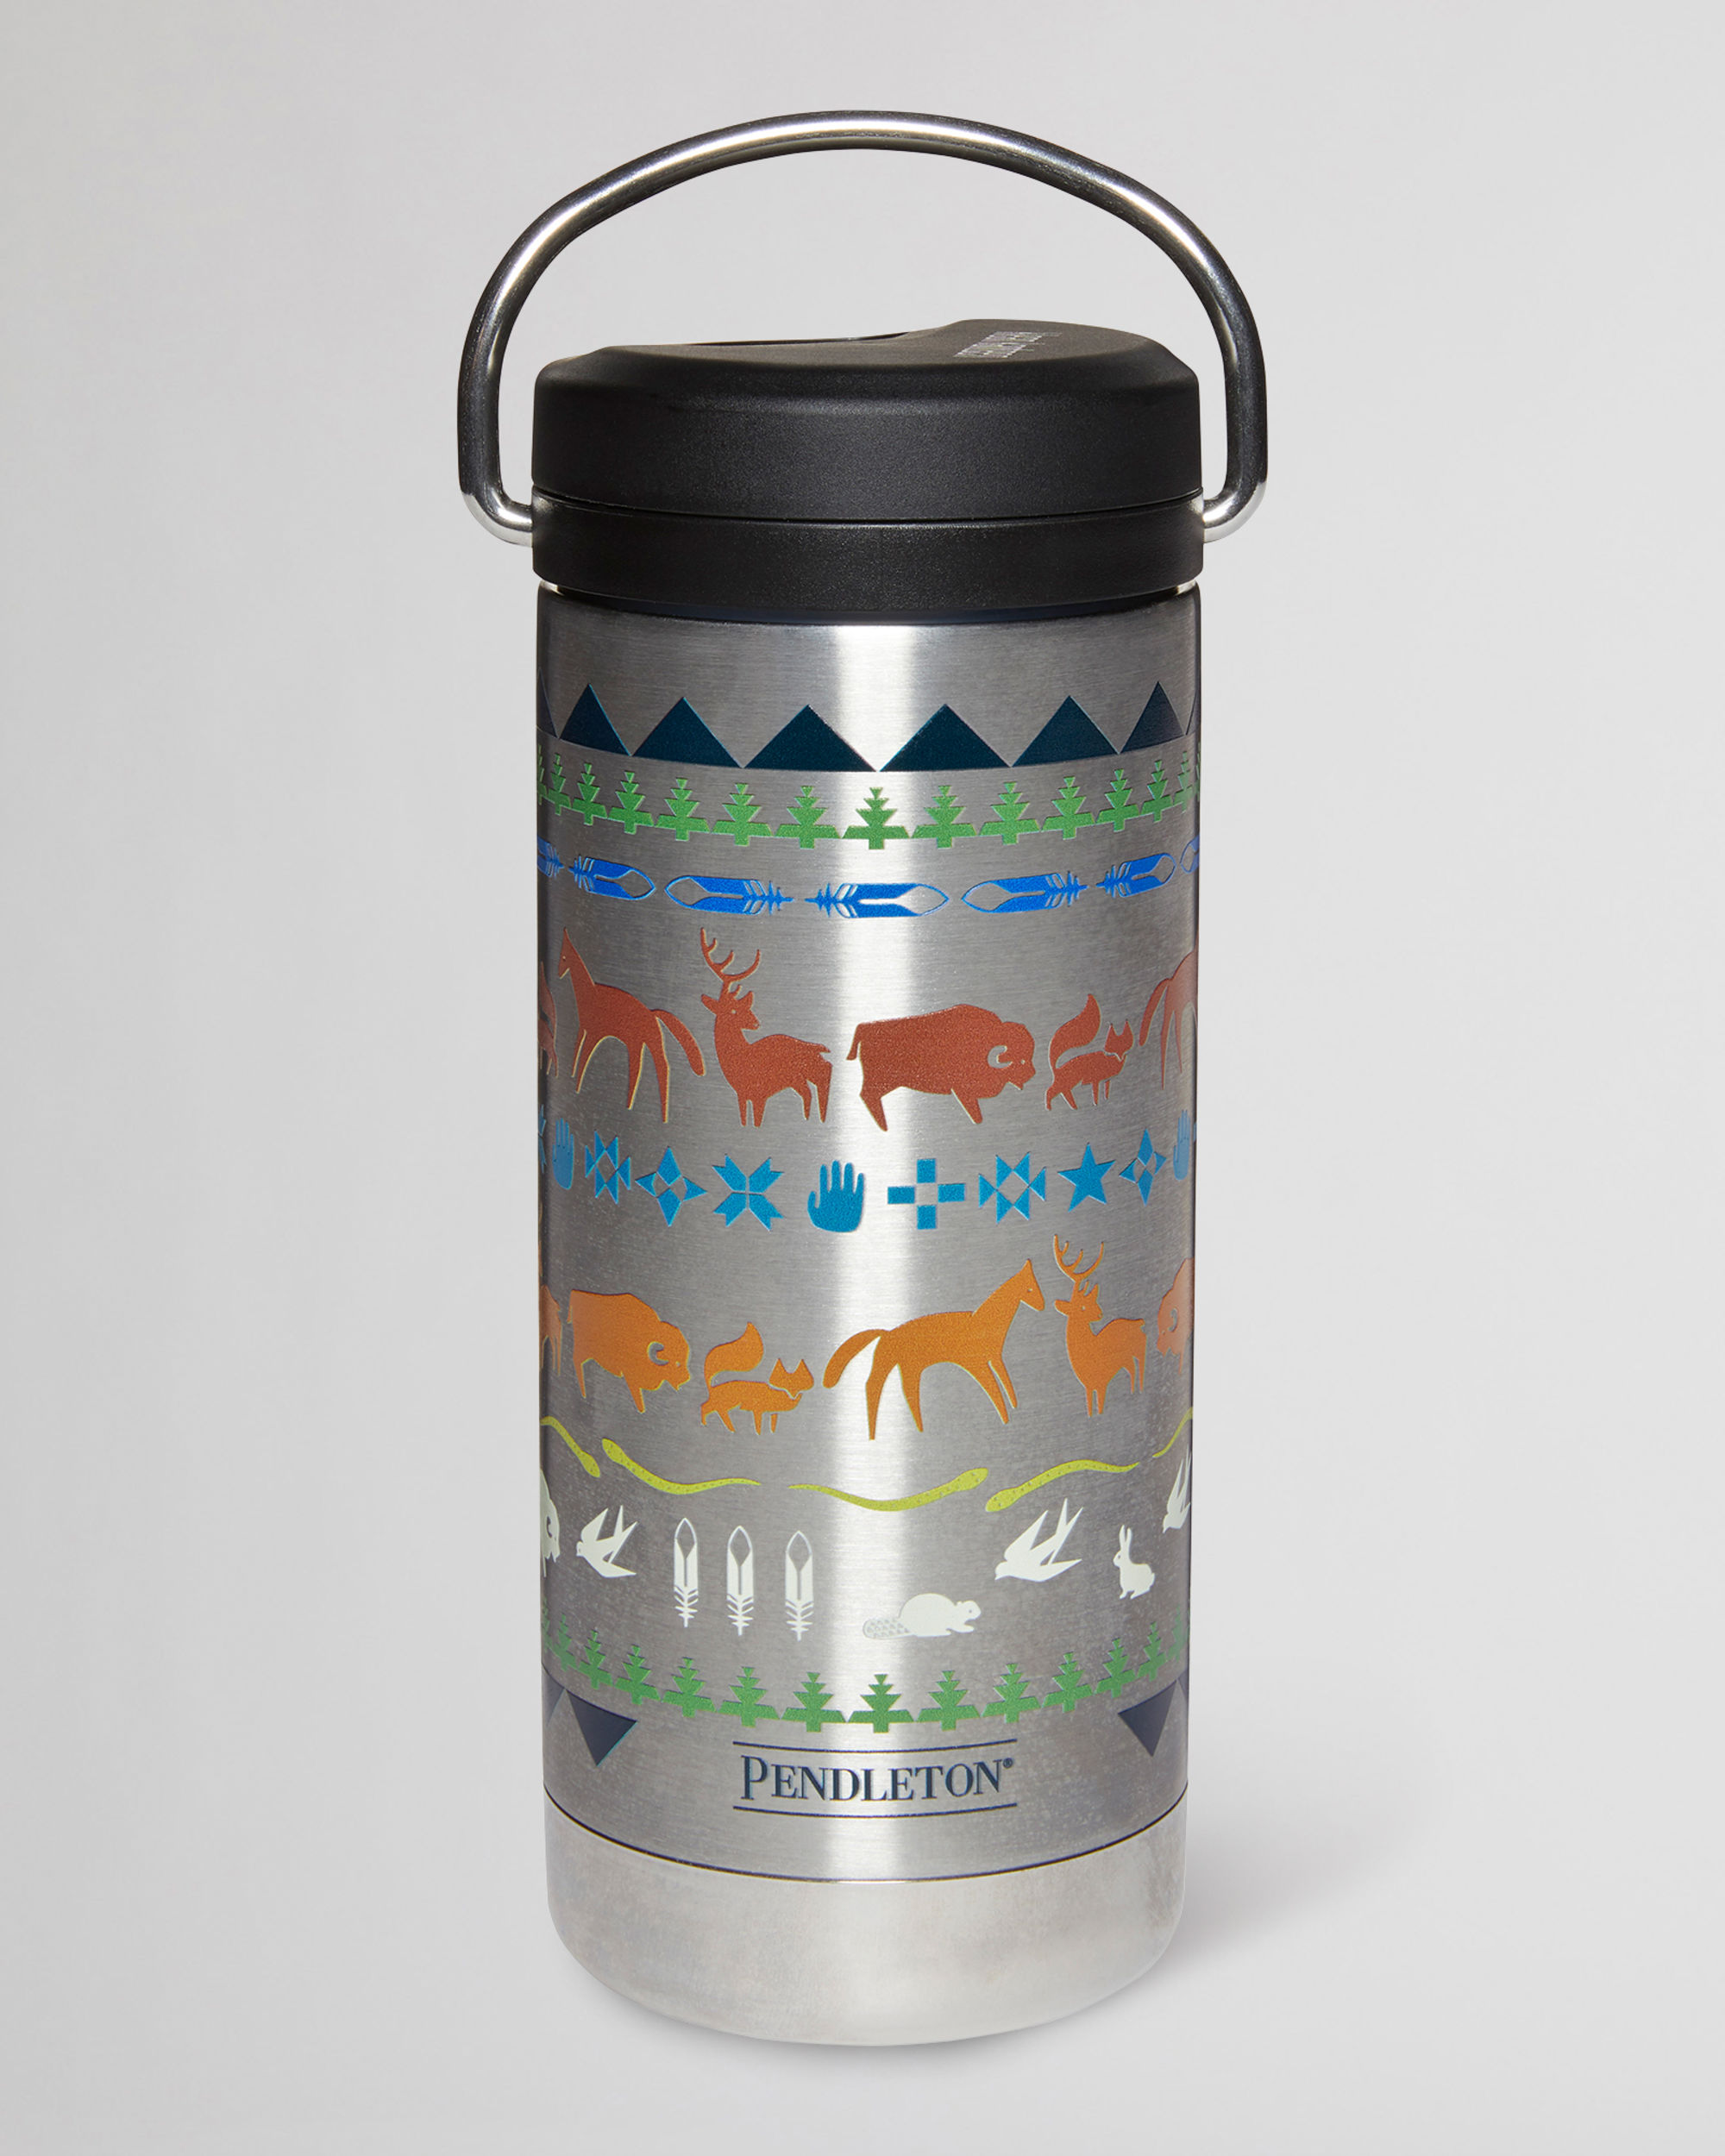 Shared Paths 12oz Insulated Tumbler